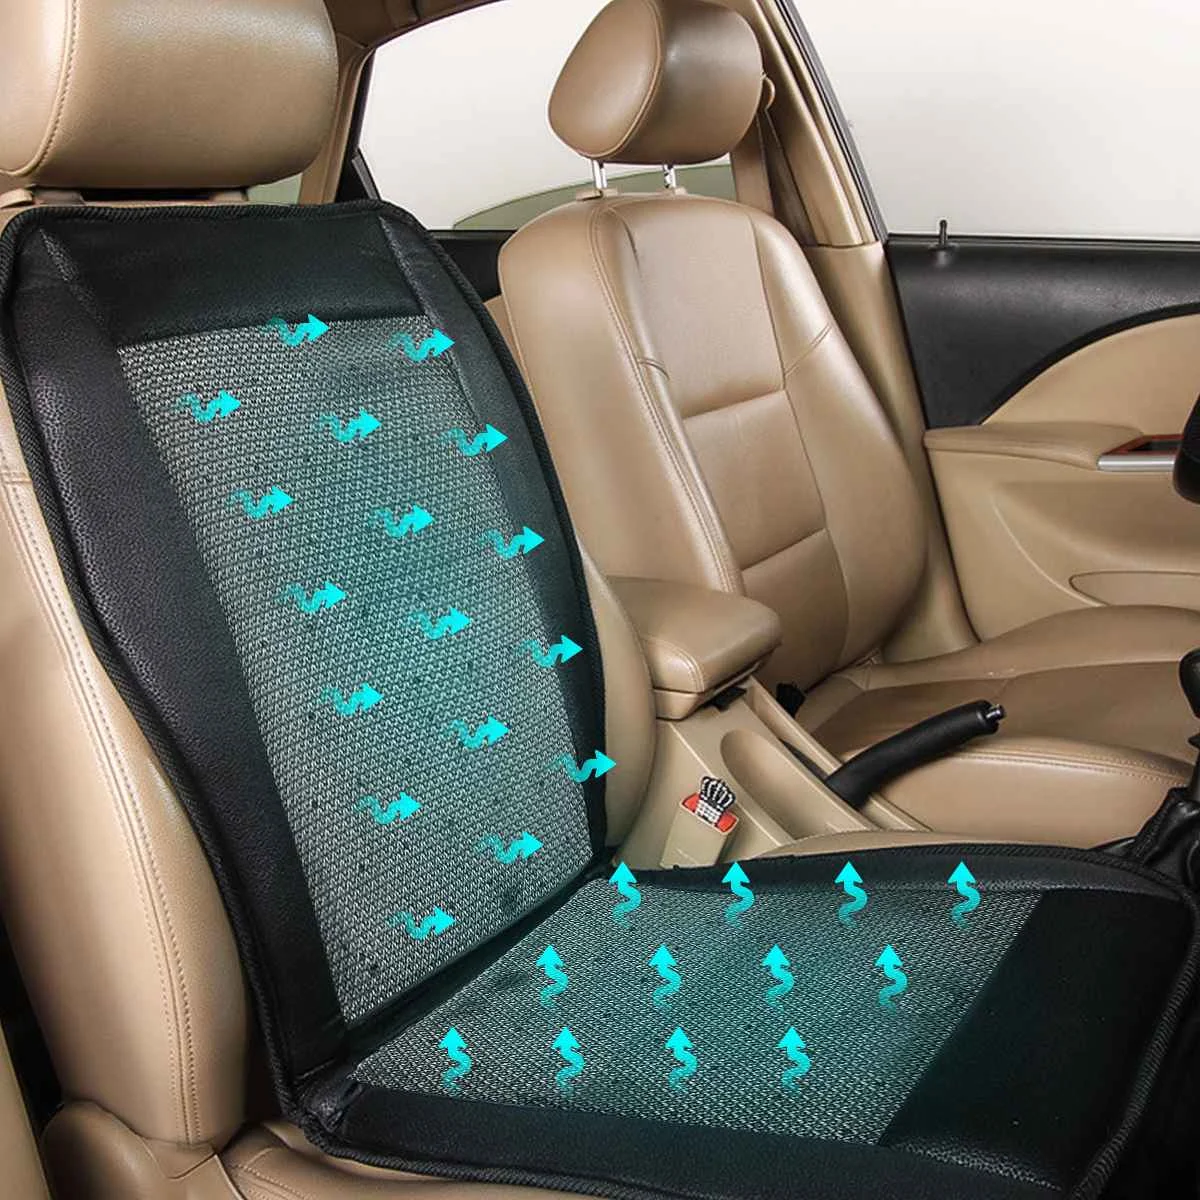 12v new summer cool ventilation cushion car cushion cooling seat air fan massage seat air conditioning cushion 2 speeds lowhigh free global shipping